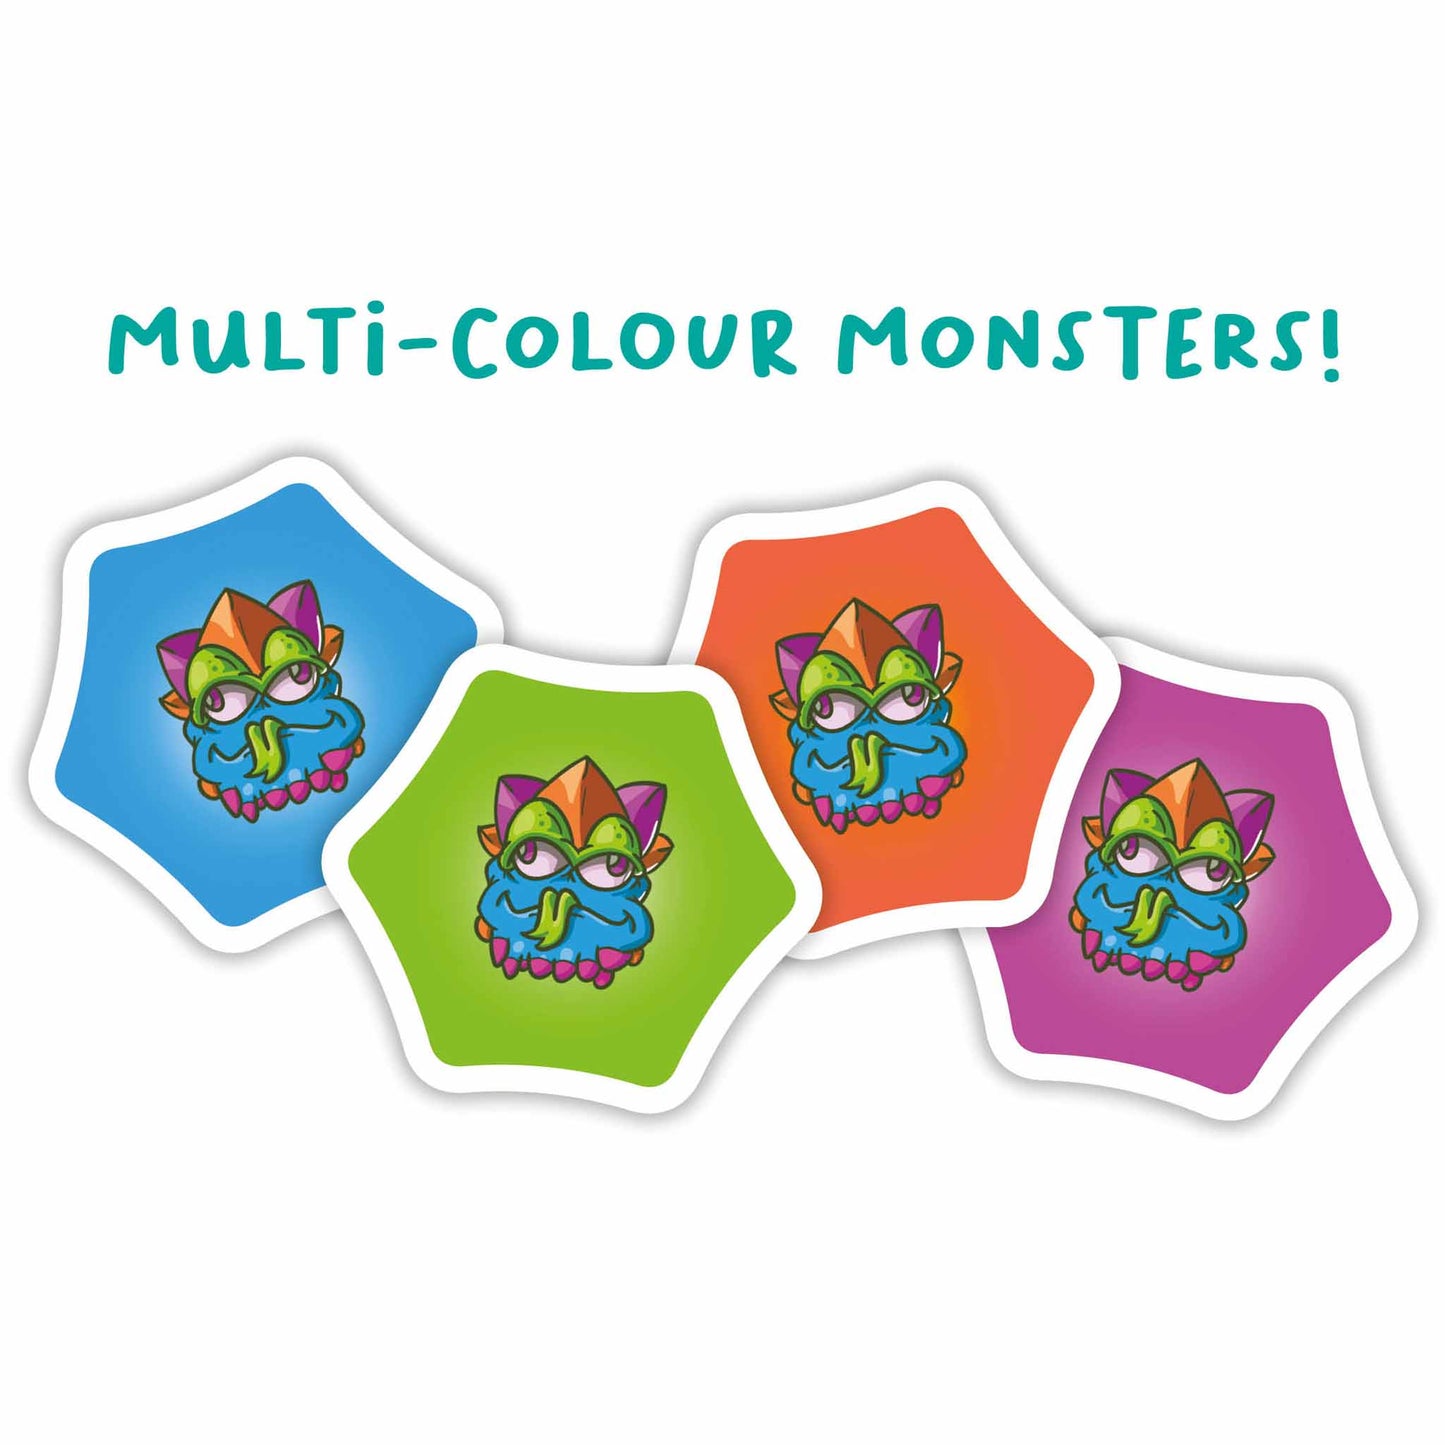 Photo of multi-colour monsters in Monster Mash game by FLEXIQ.